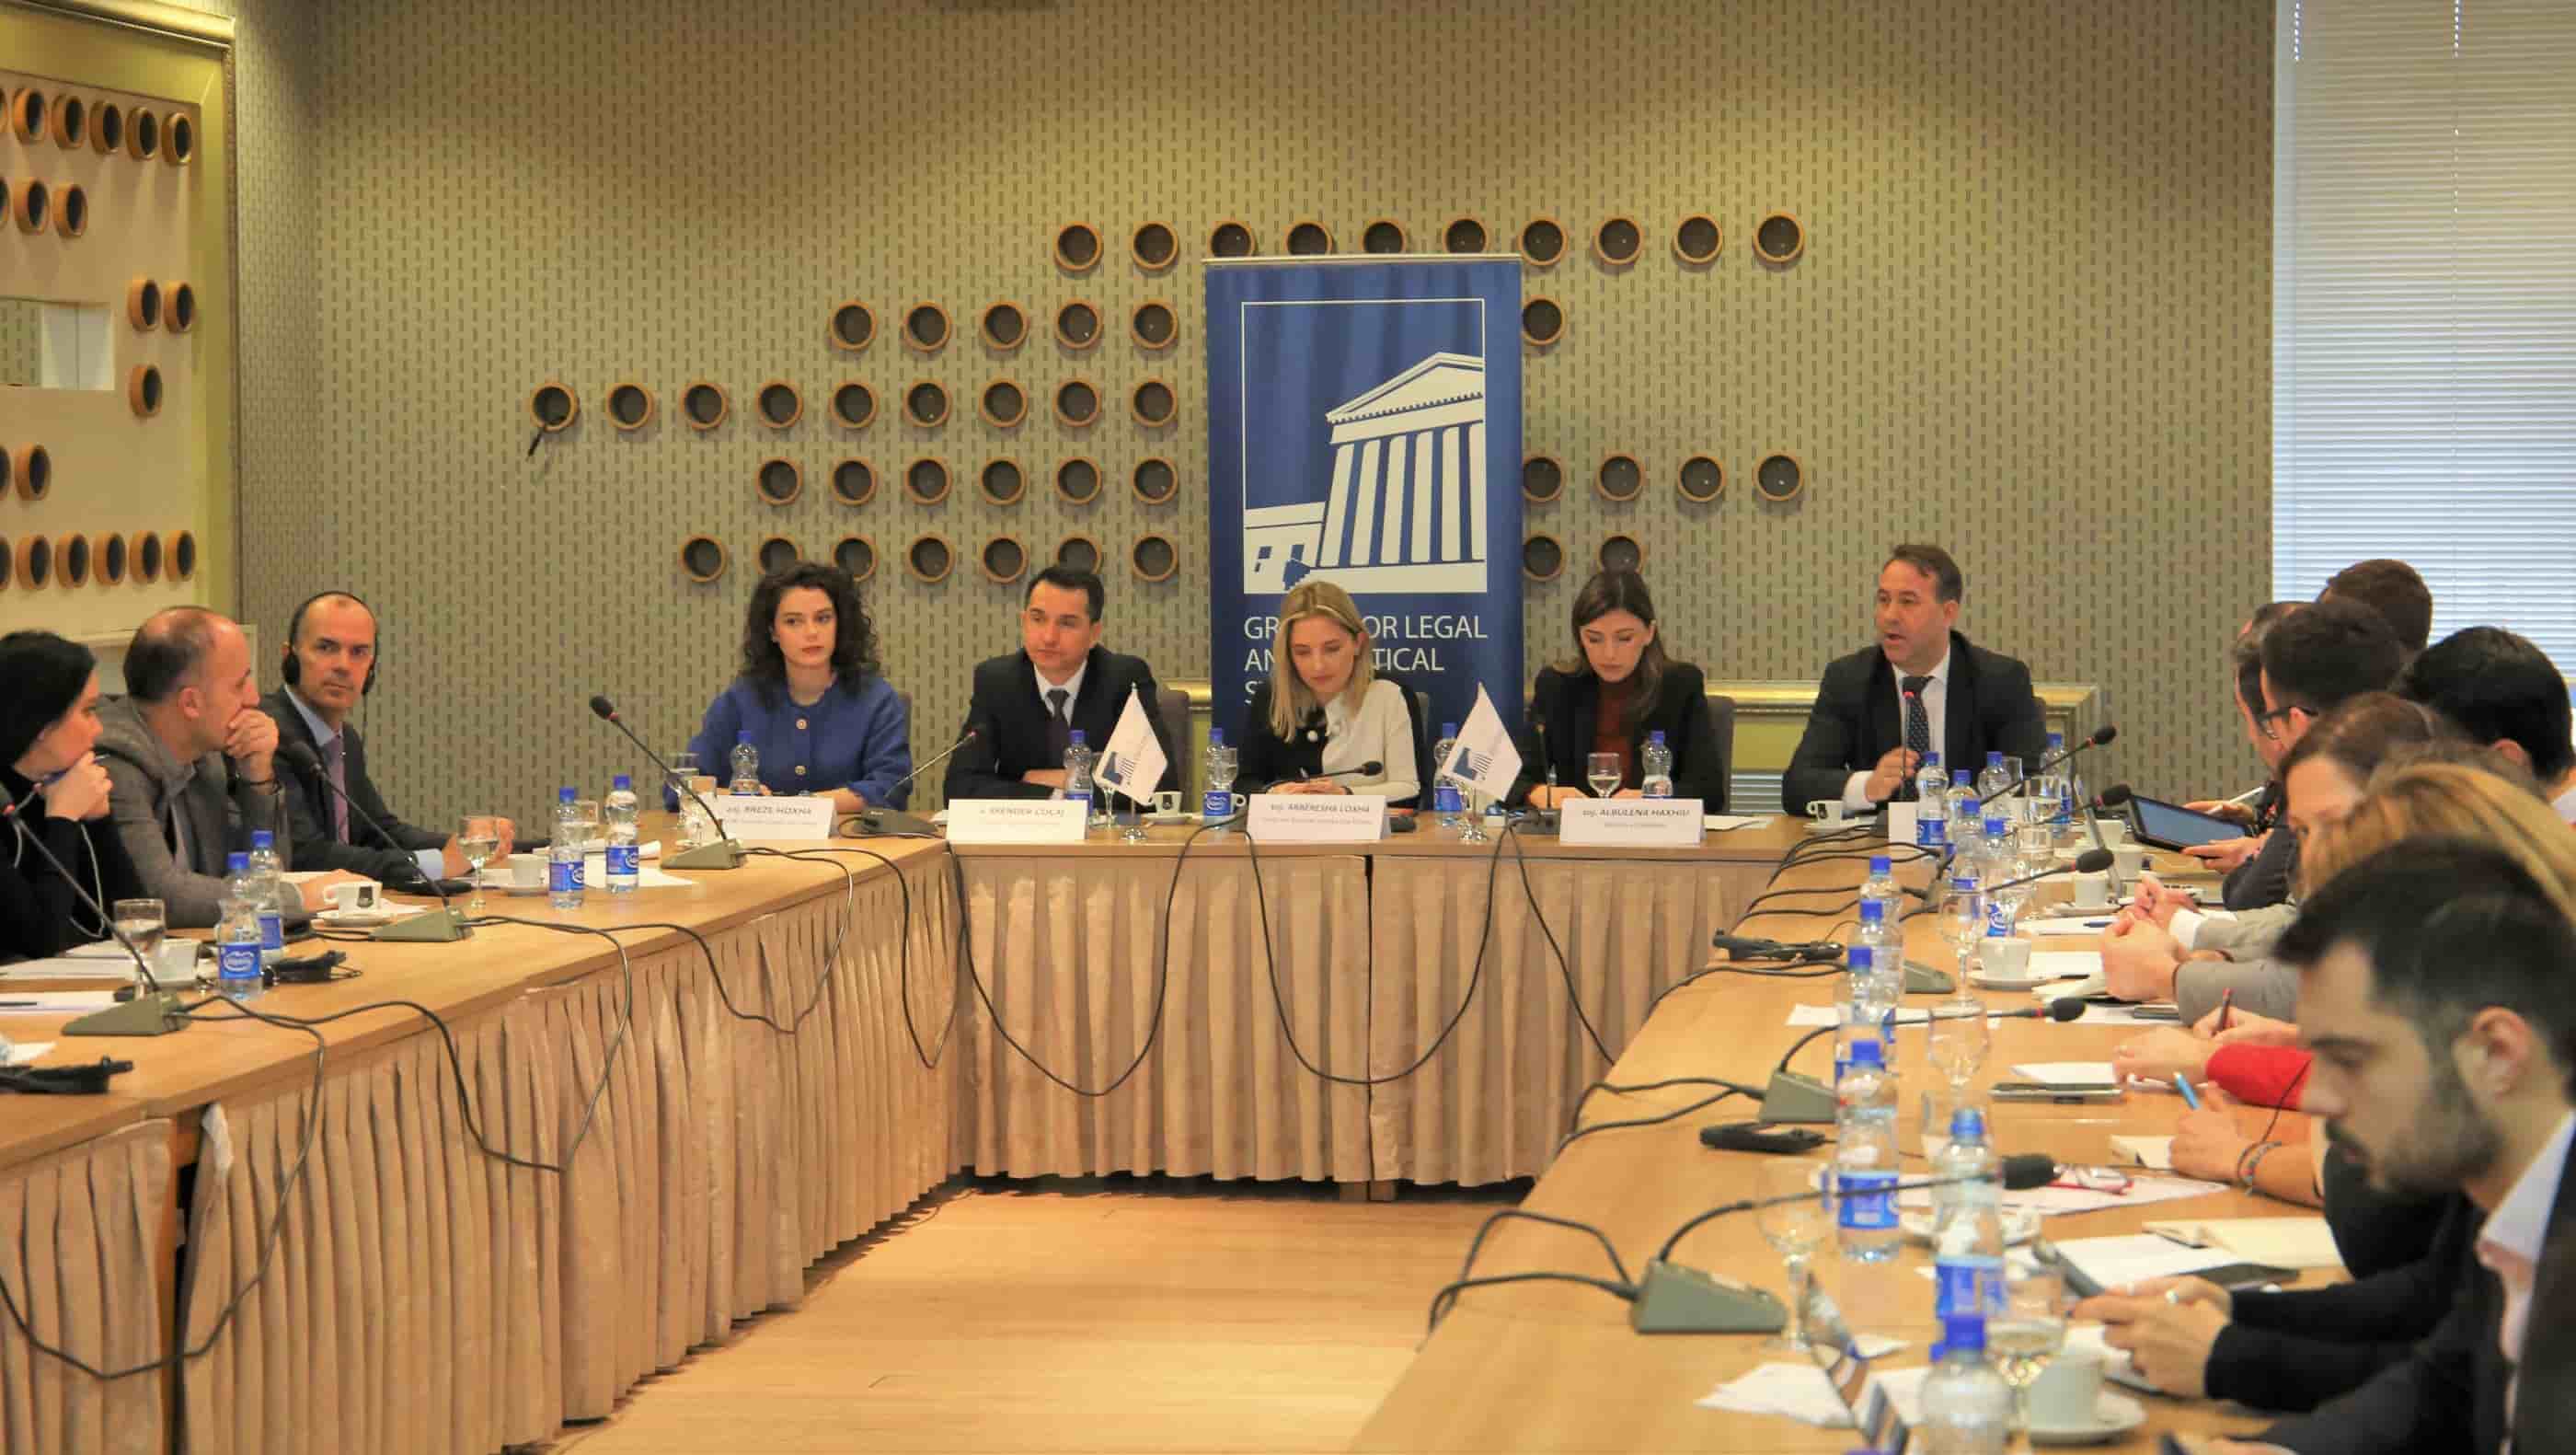 Vetting in Kosovo, topic of discussion table